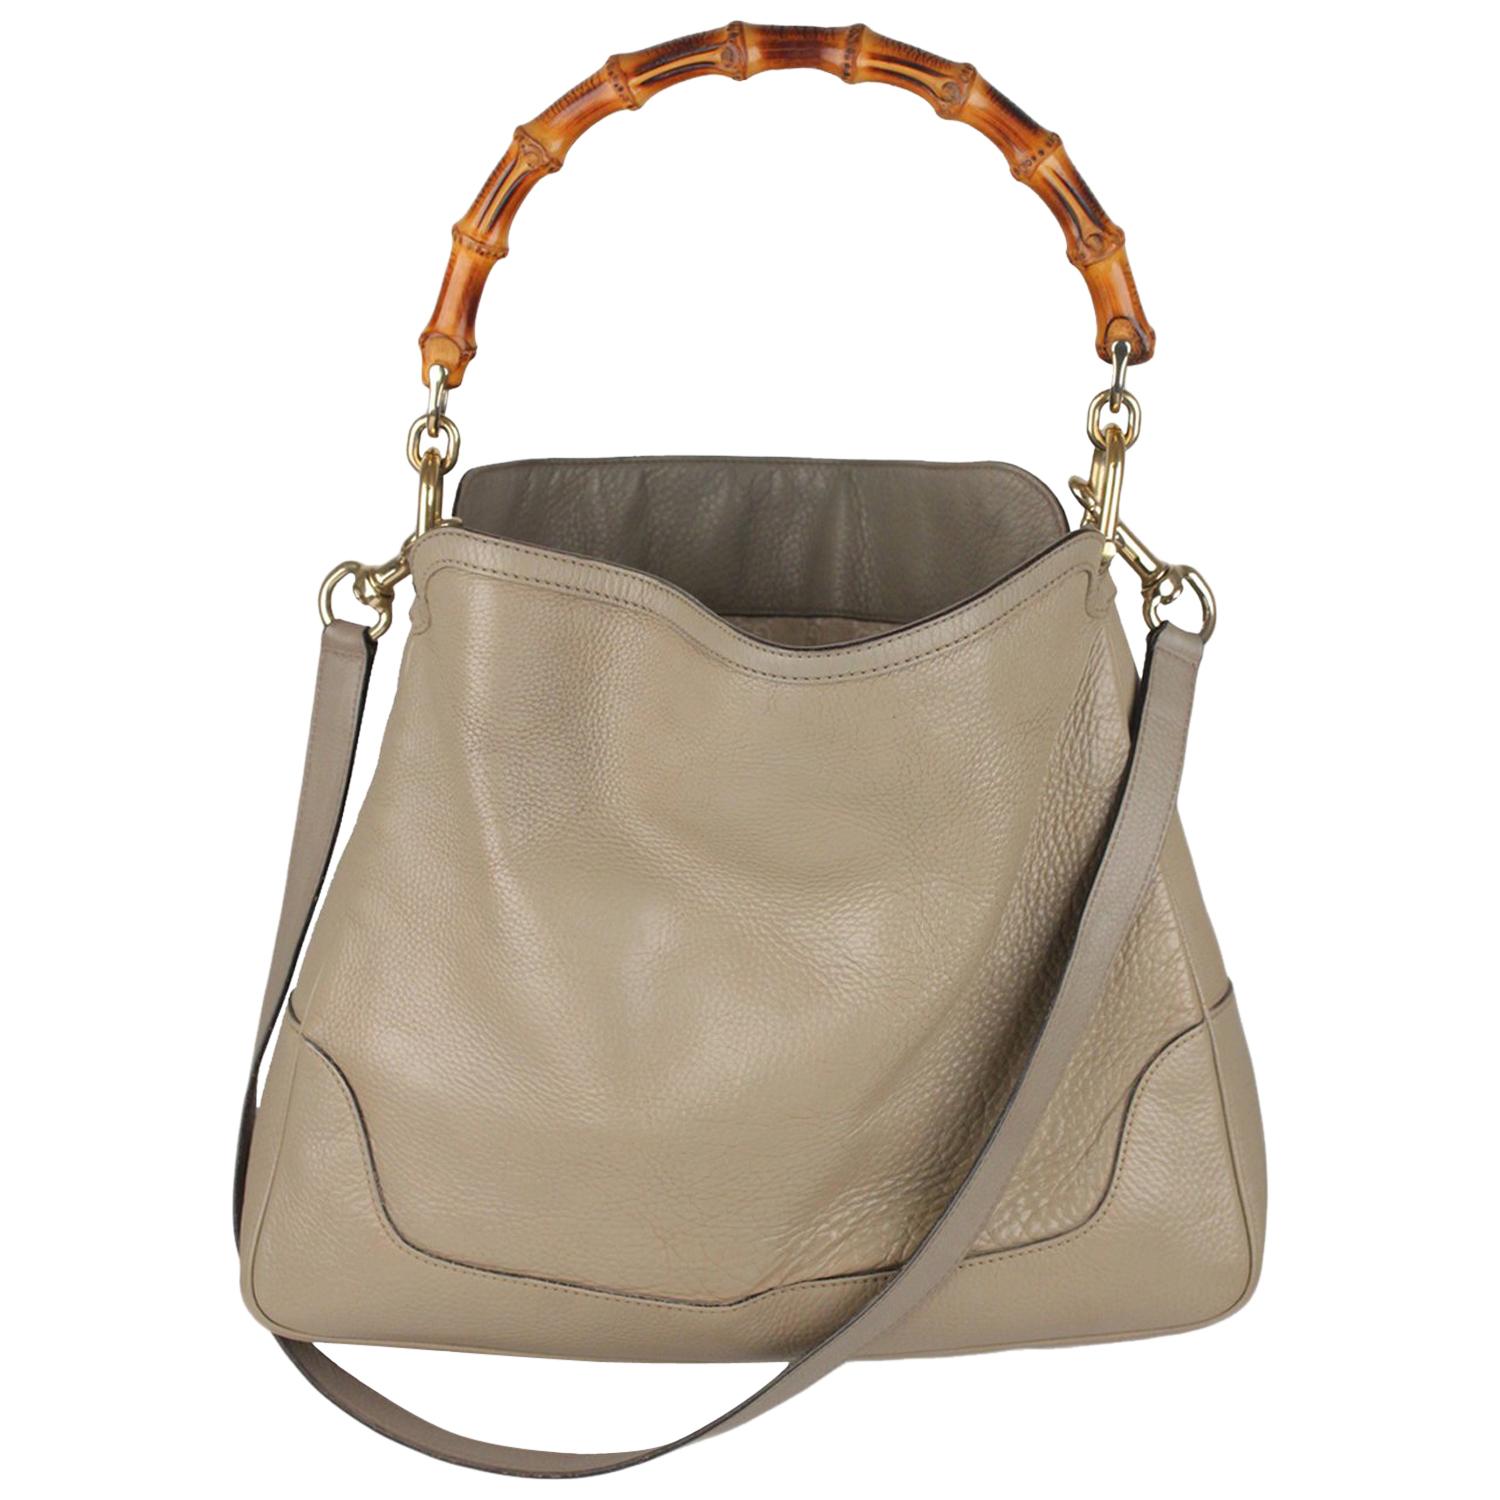 Gucci Taupe Leather Diana Hobo Bag Tote Bamboo Handle